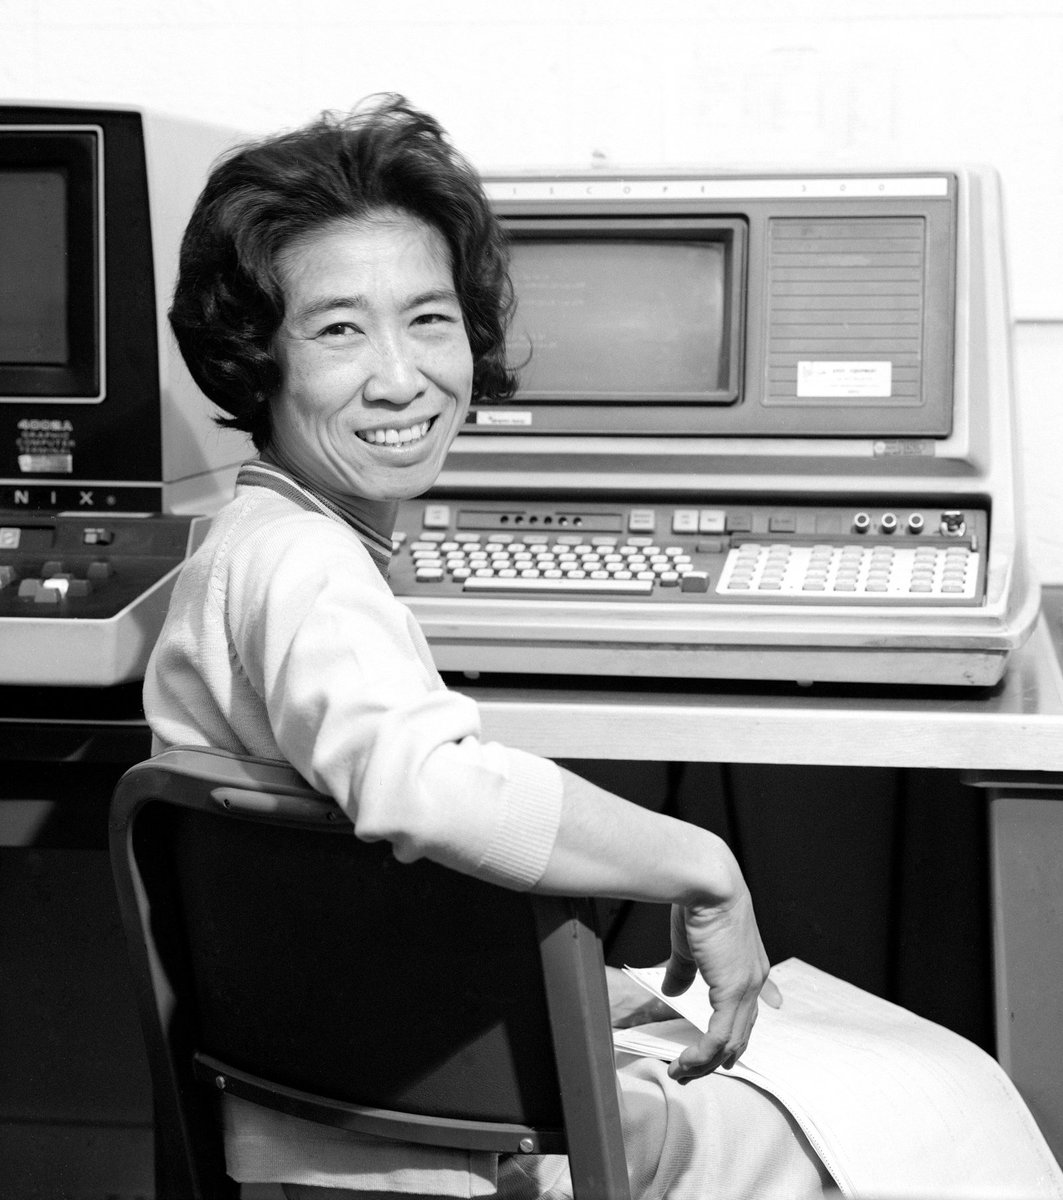 In the 1960s, Helen Ling became a supervisor for @NASAJPL's computing group, a team responsible for performing trajectory calculations. Ling encouraged the group's women to get degrees and was a powerhouse in bringing women engineers into JPL. #AANHPI ➡️ go.nasa.gov/3wlnJnD